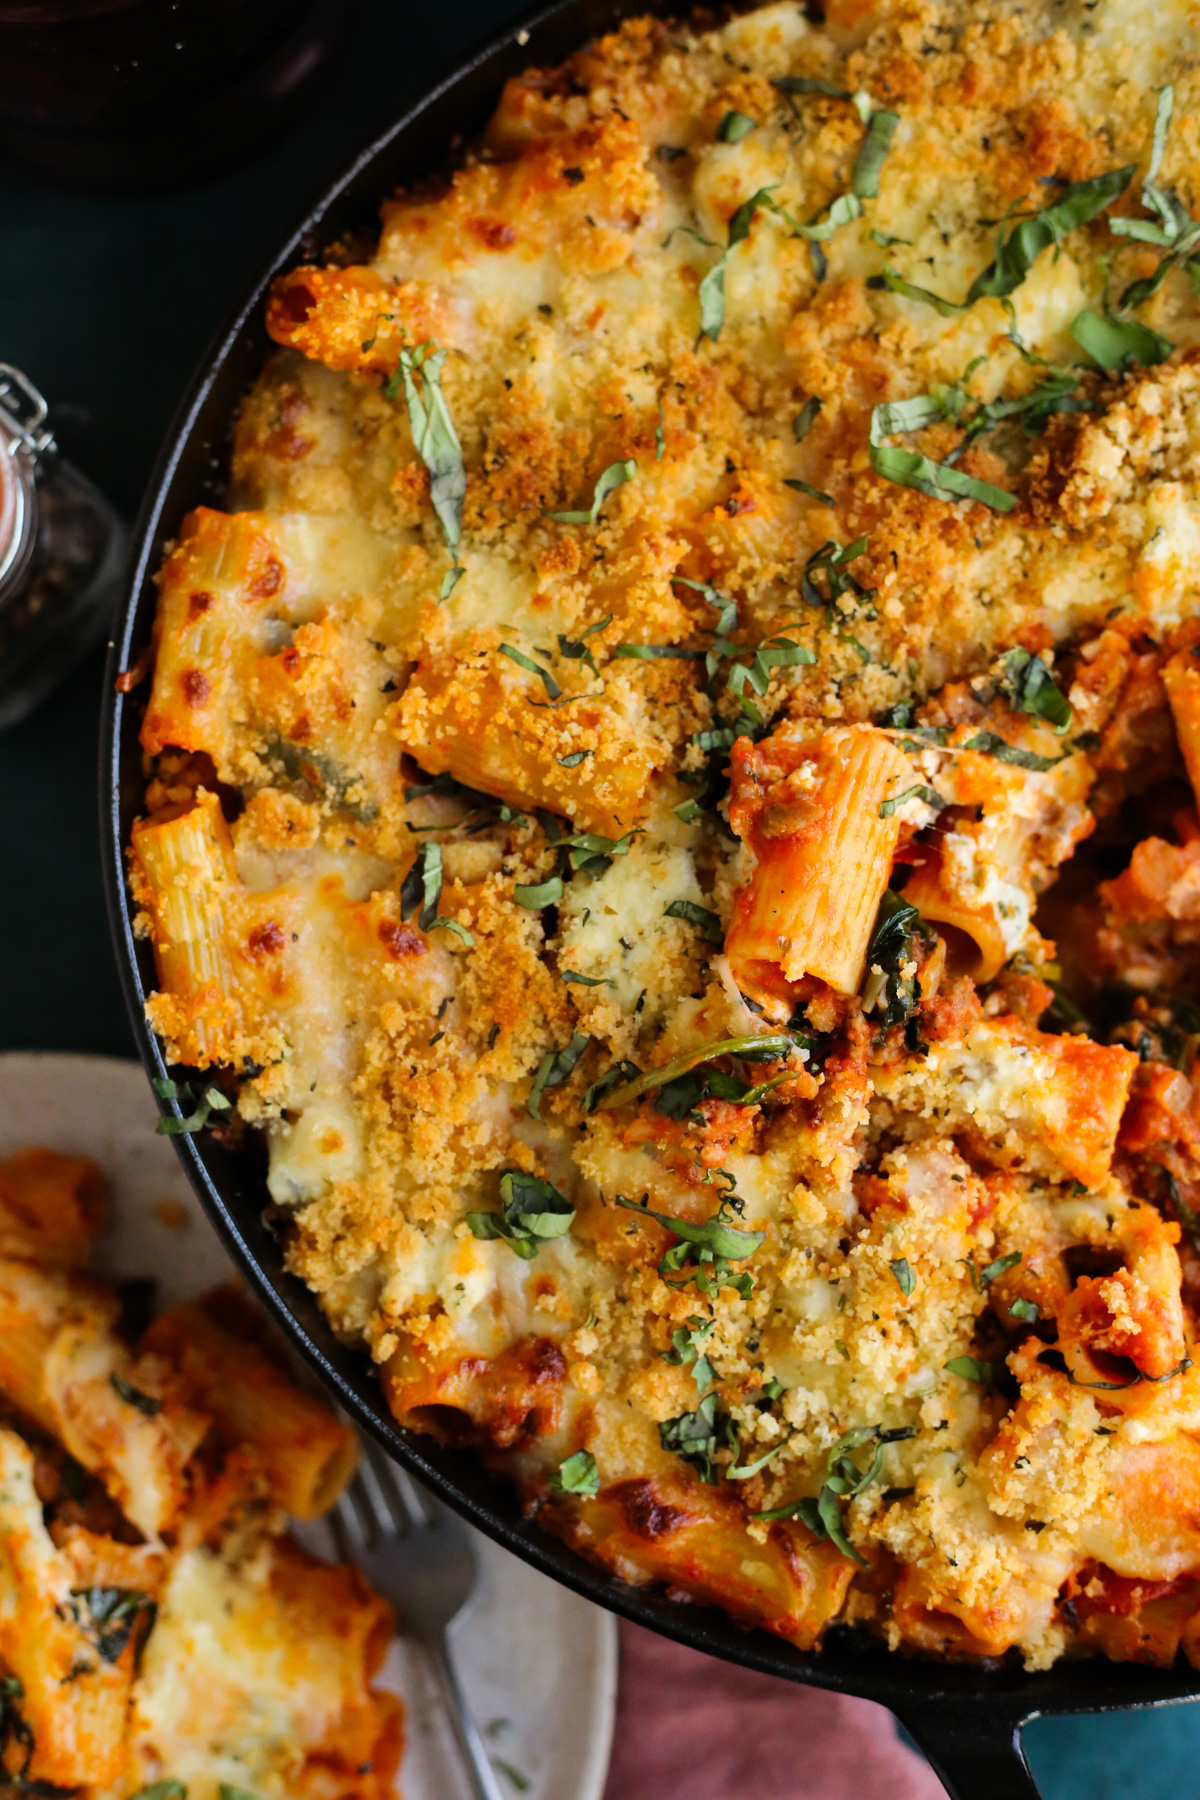 Overhead view into a round casserole dish filled with a baked rigatoni recipe, with a melted cheese and breadcrumb topping and some fresh basil  on top